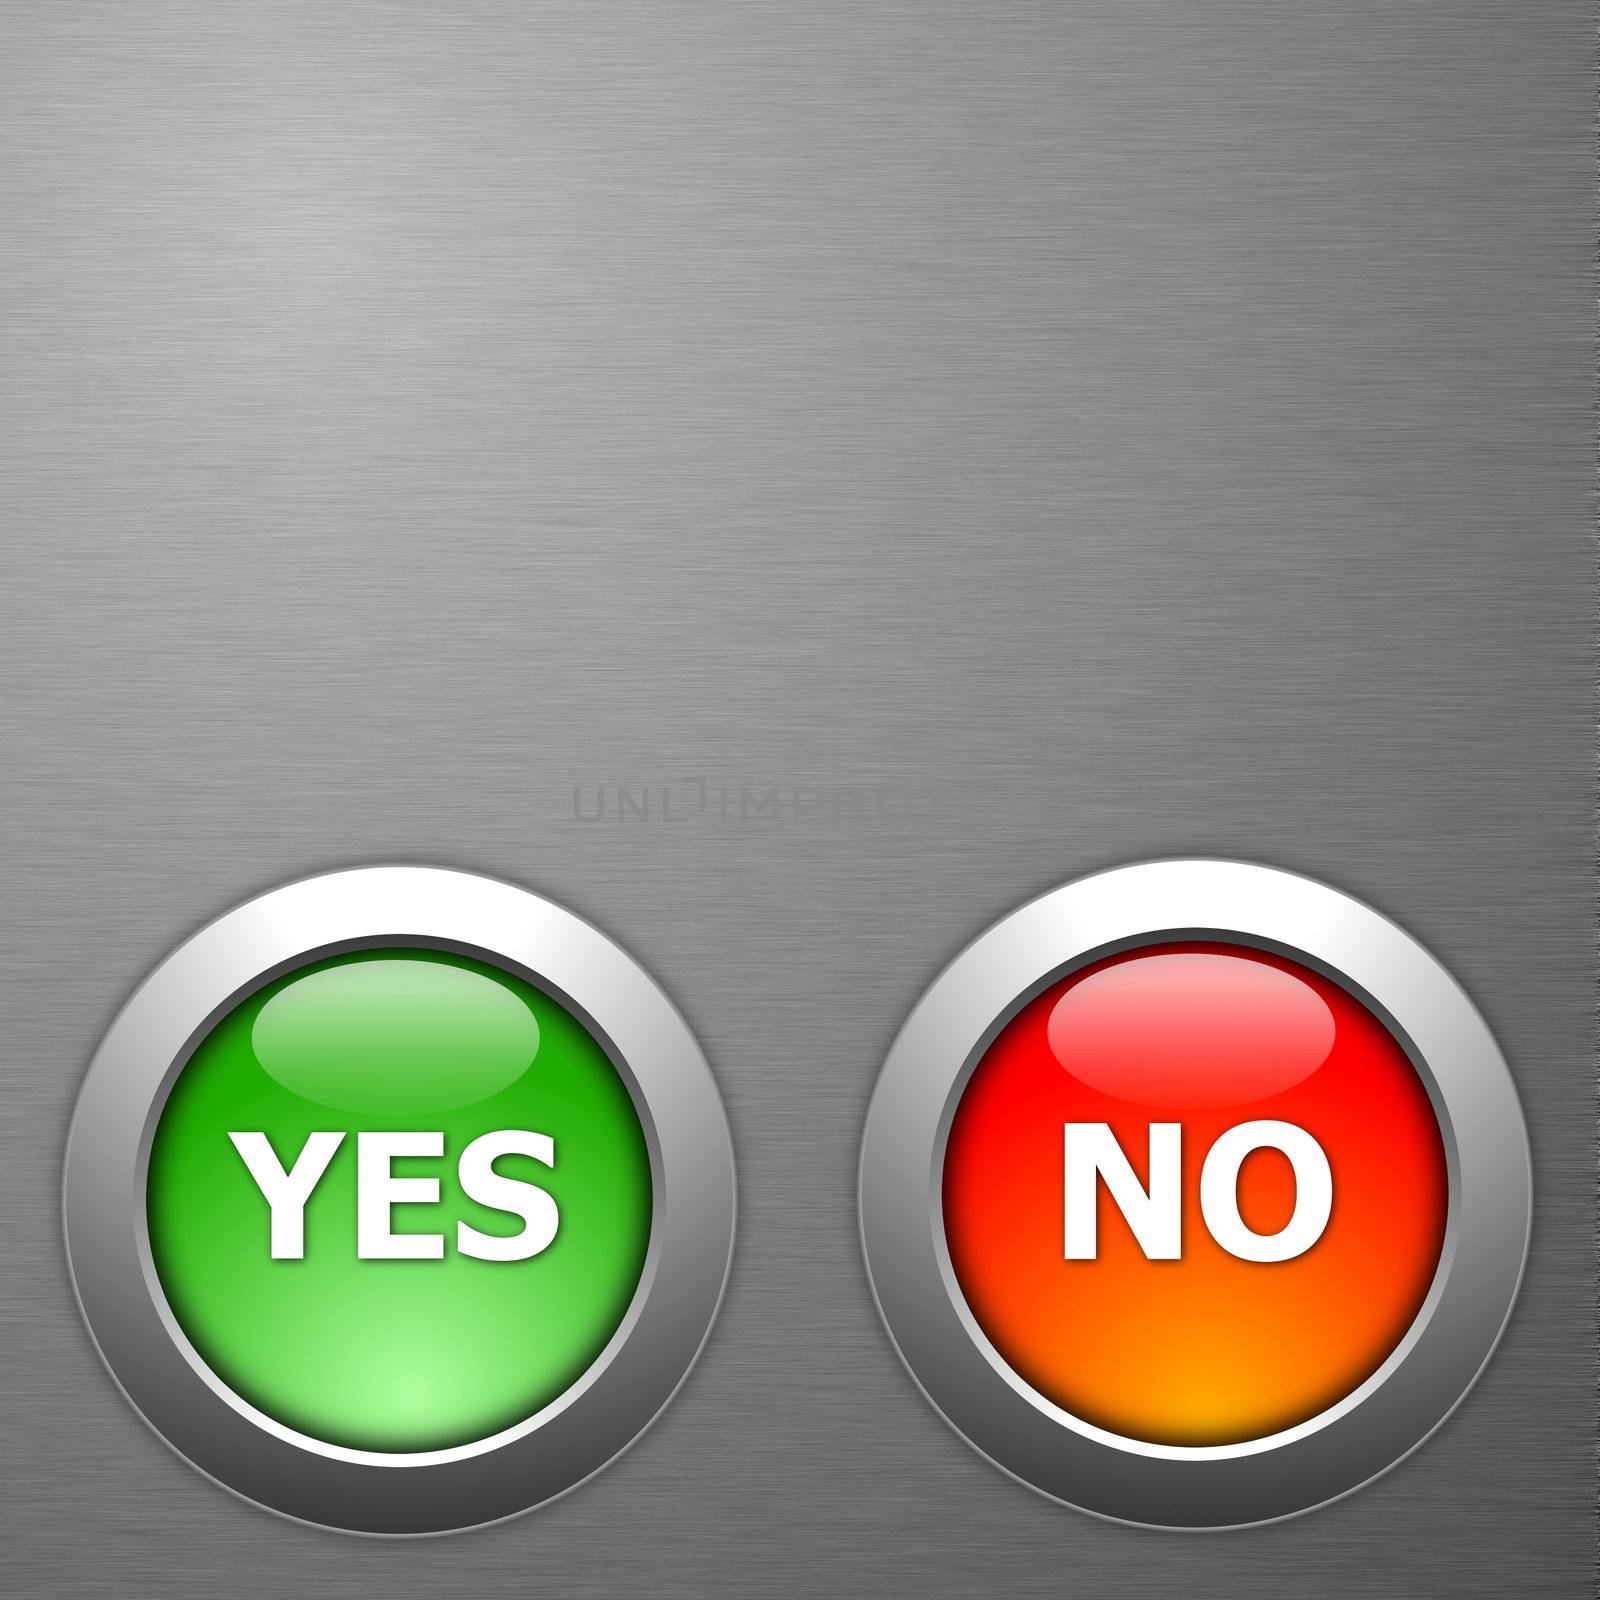 yes and no button on metal background with copyspace